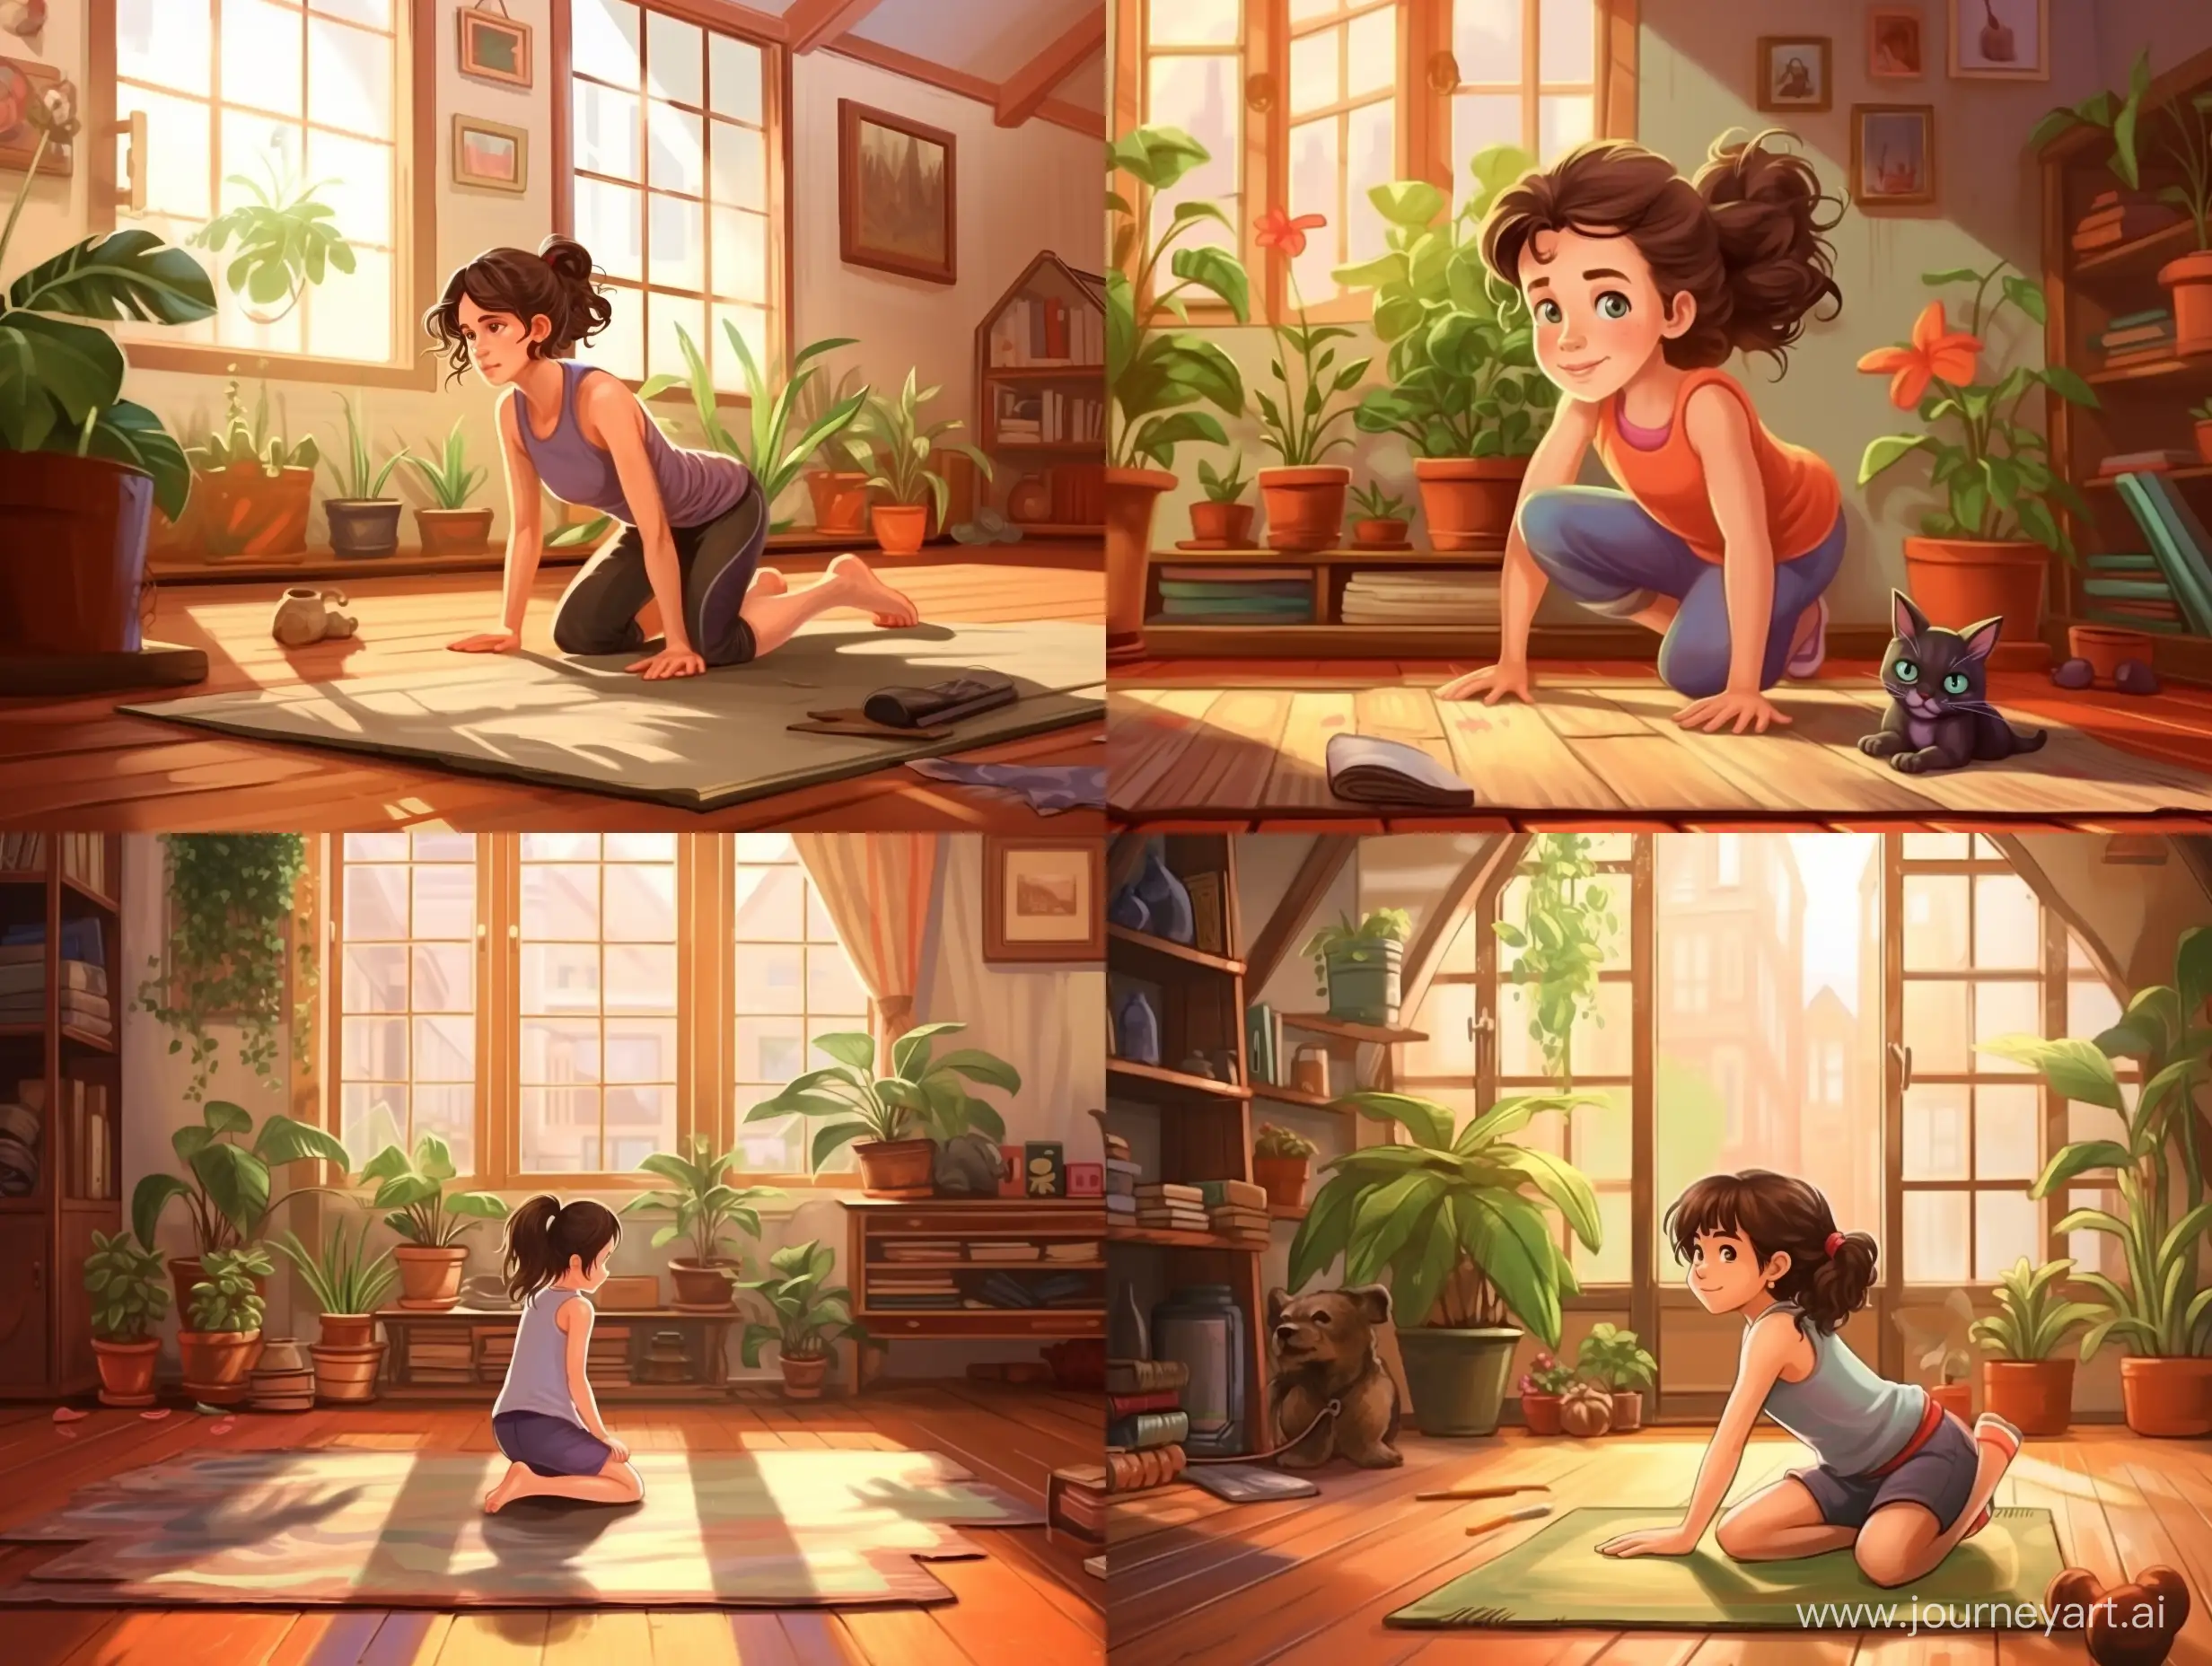 Home-Workout-Young-Girl-Exercising-on-a-Beautiful-Wooden-Floor-with-Potted-Plants